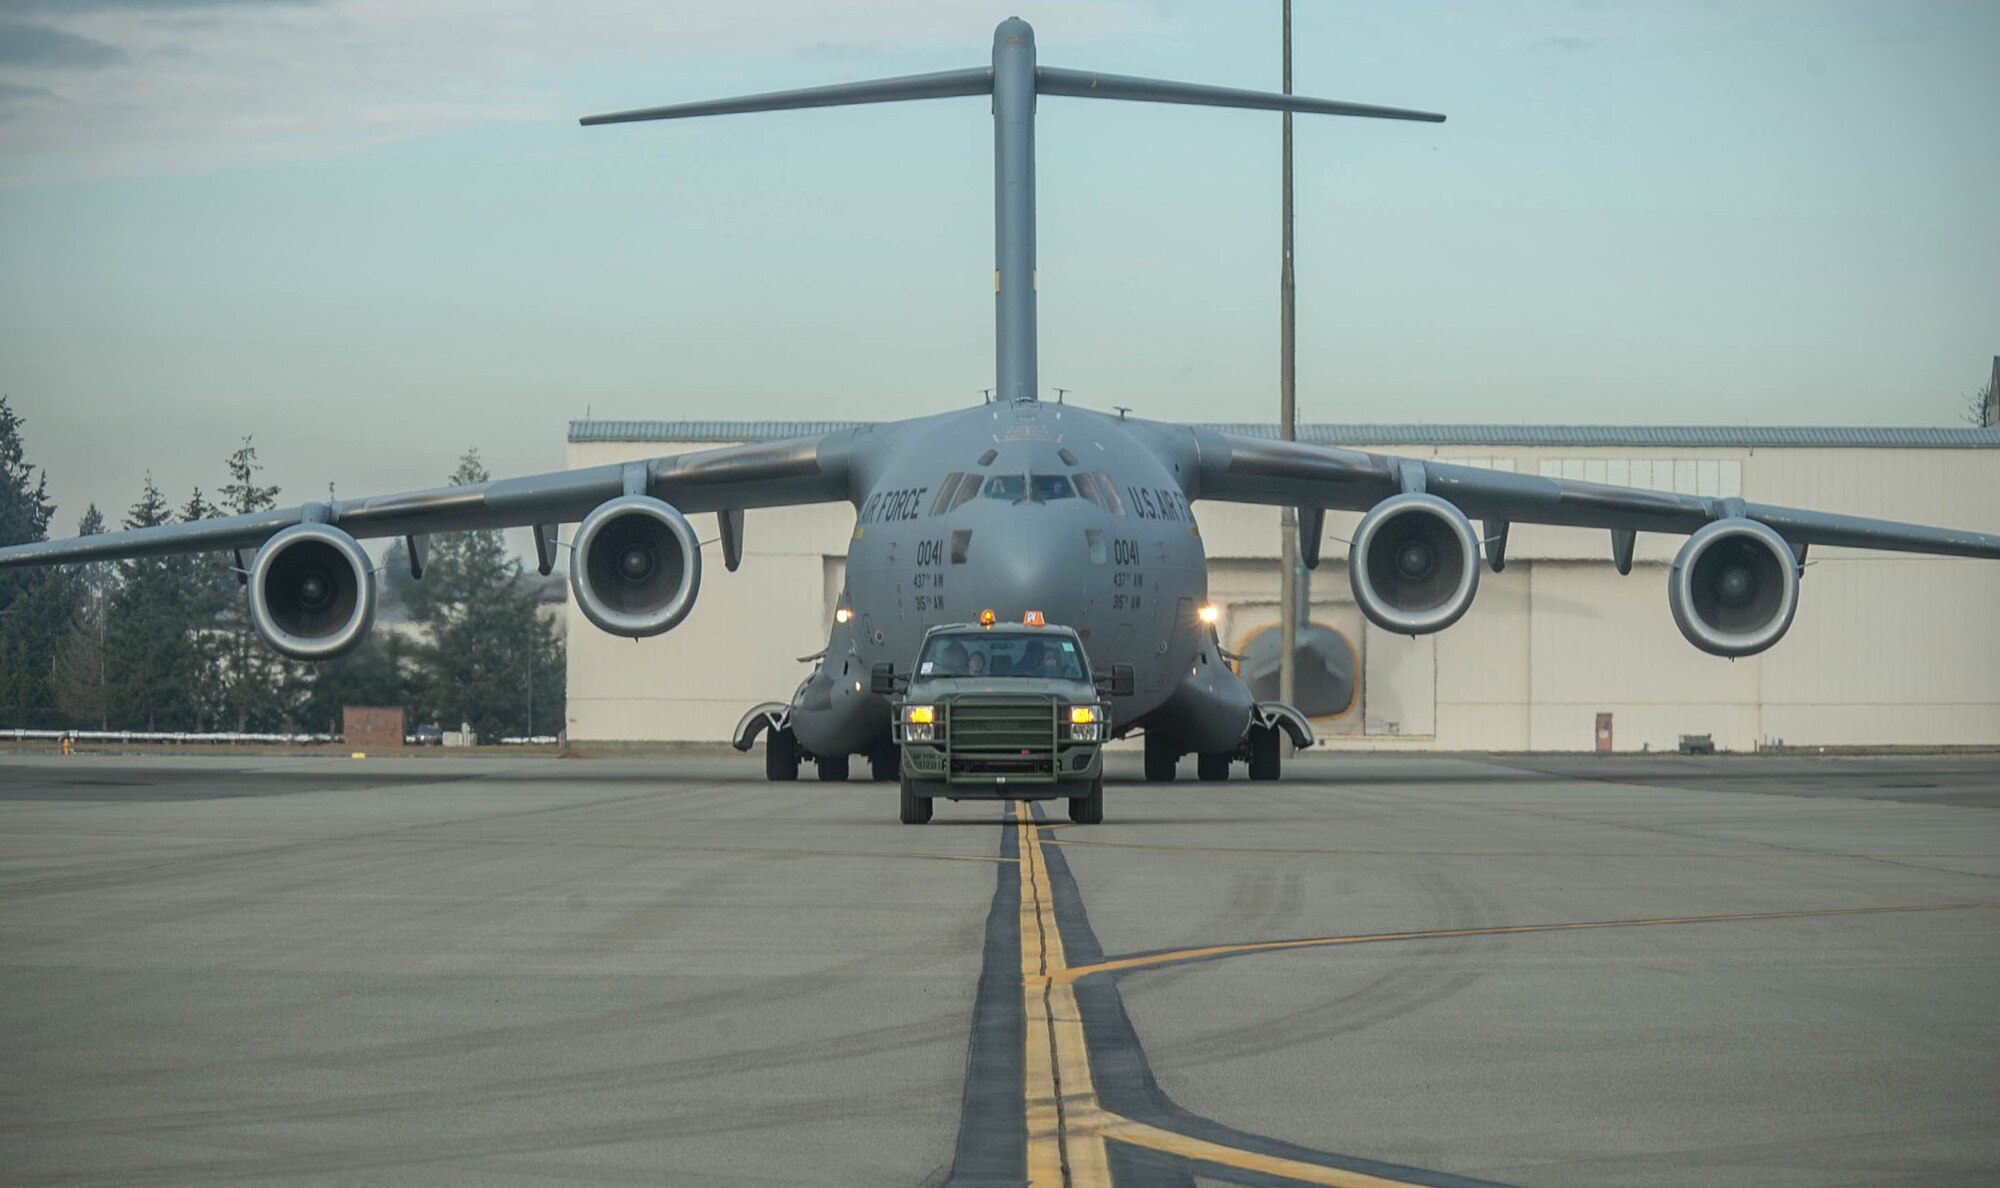 Ramp coordinators from the 821st Contingency Response Squadron, lead a C-17 Globemaster III to its parking spot, Jan. 24, 2017, at Joint Base Lewis-McChord, Washington. Airmen from the 821st Contingency Response Group, exercised their capability to support humanitarian efforts during exercise Dragon Breath at JBLM and Fairchild Air Force Base. (U.S. Air Force photo by Staff Sgt. Robert Hicks)